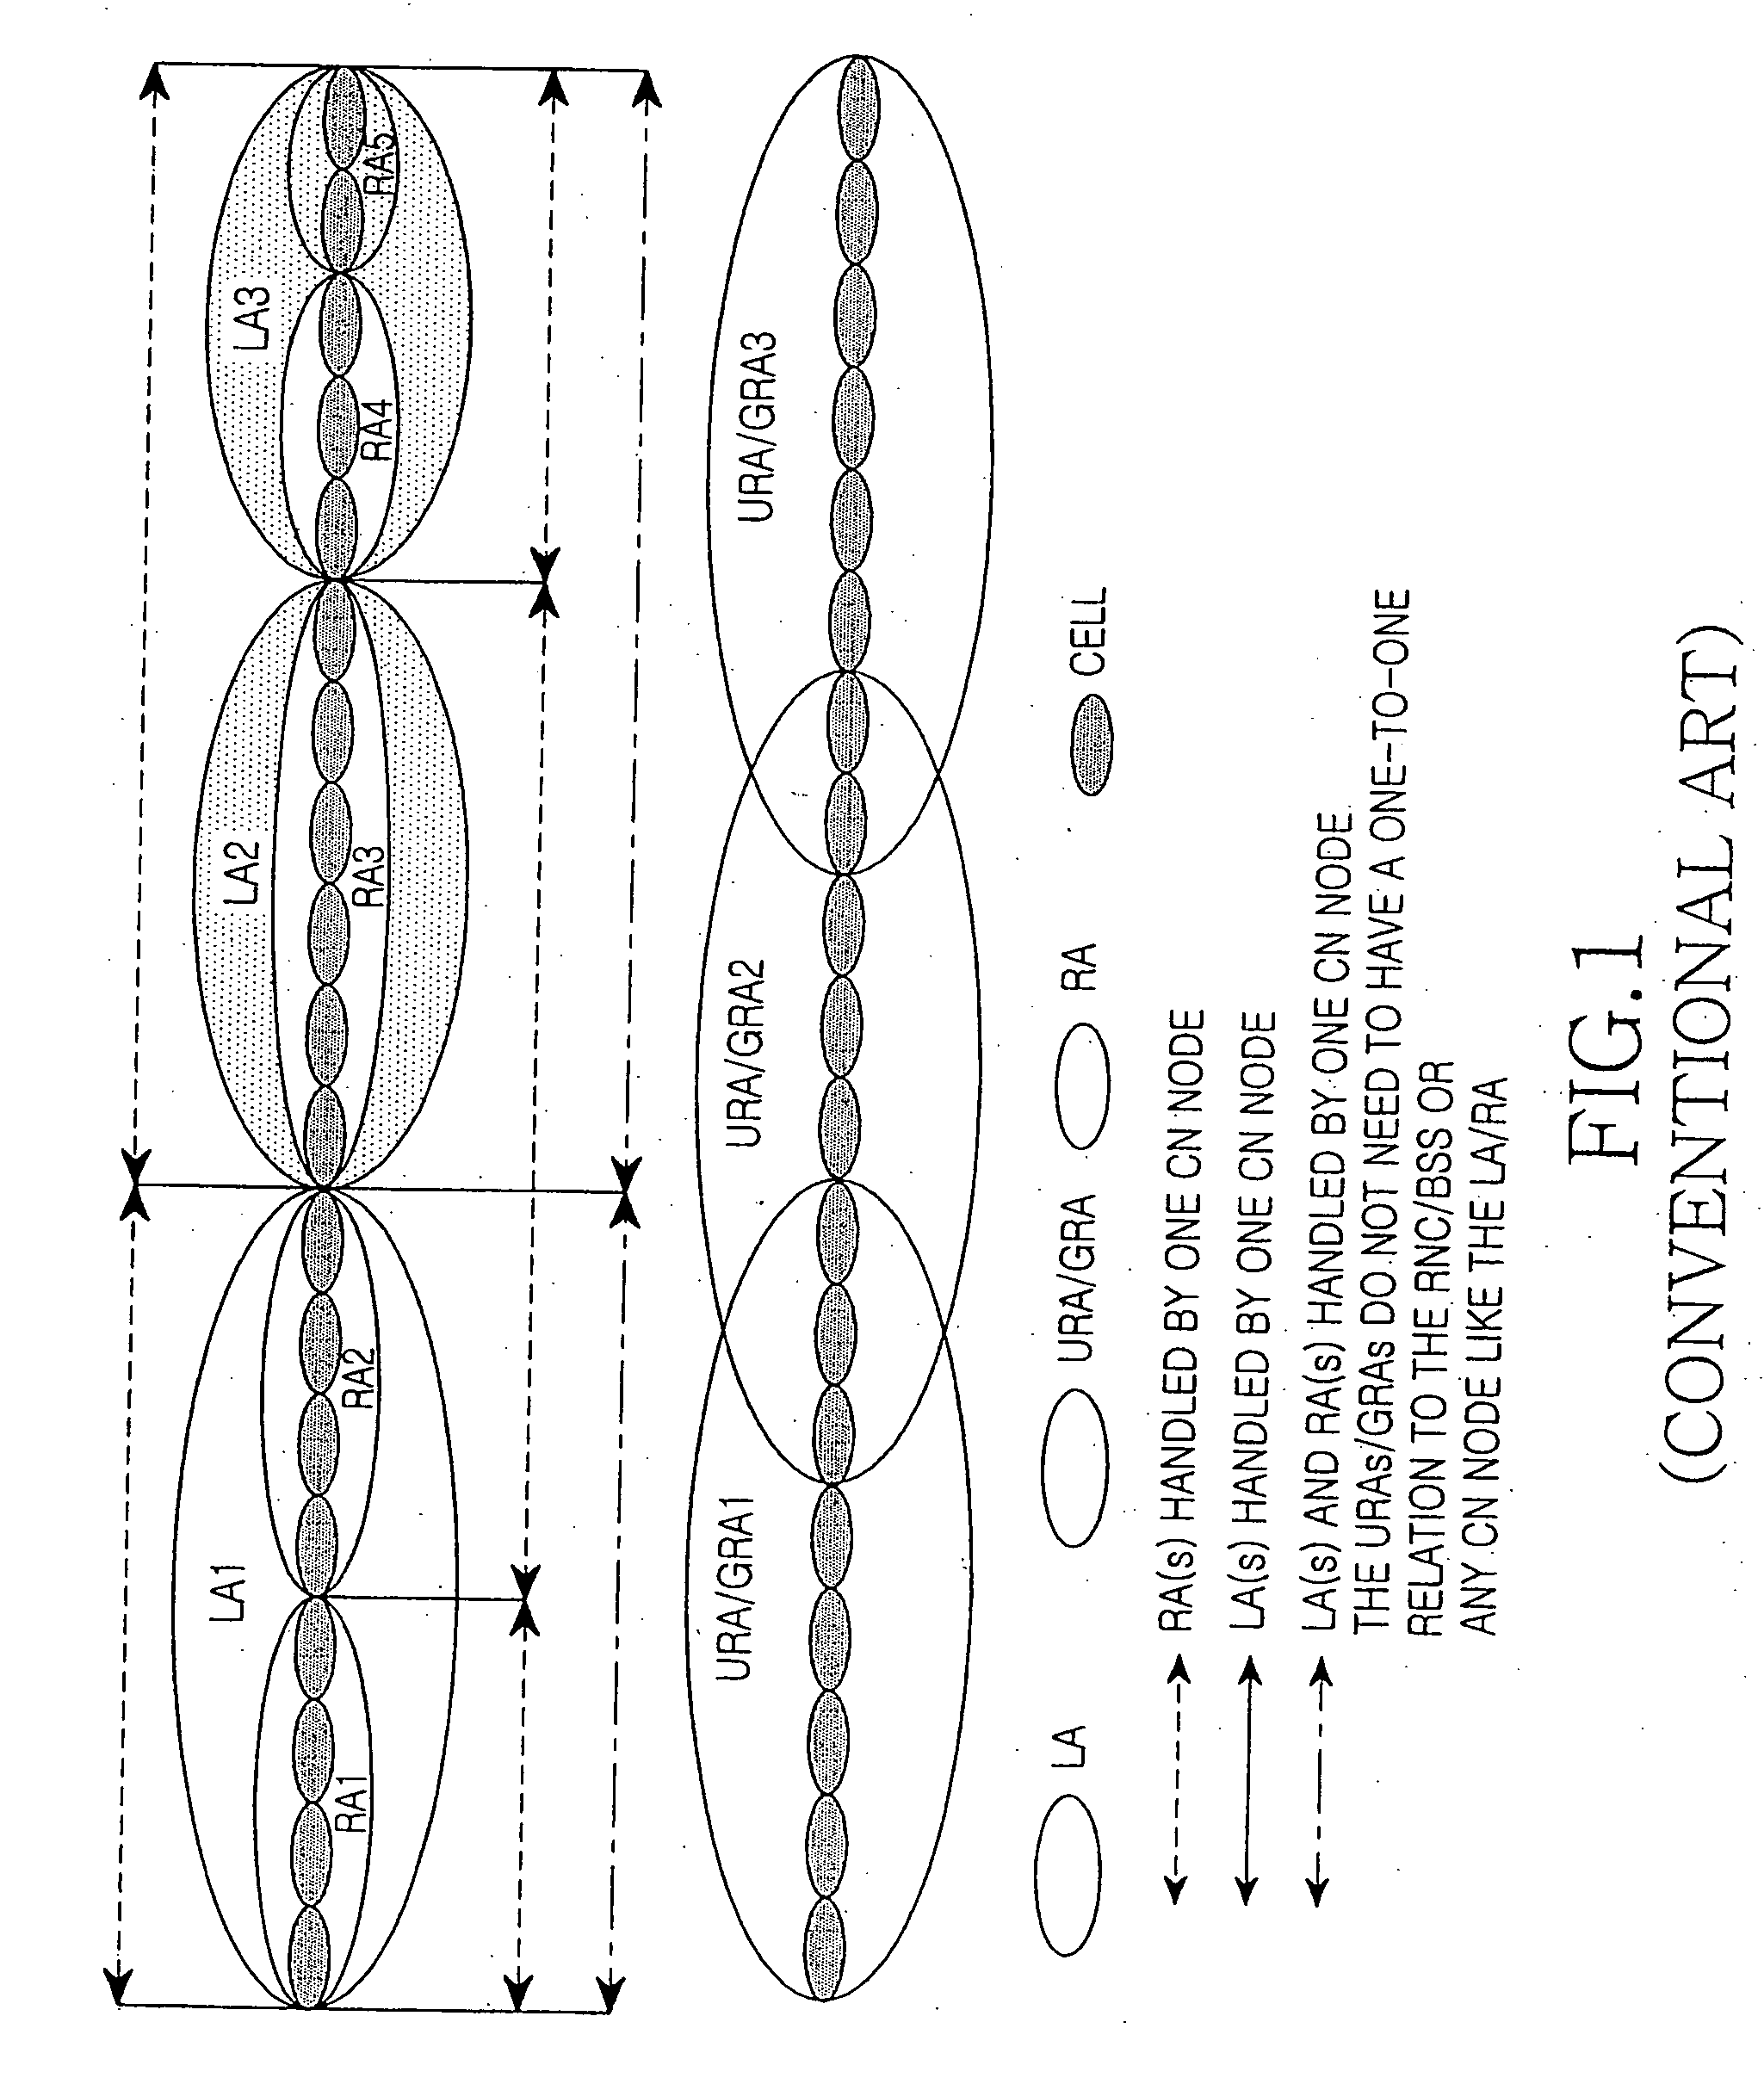 Method and apparatus for controlling measuring frequency of forbidden registration area in a mobile communication system